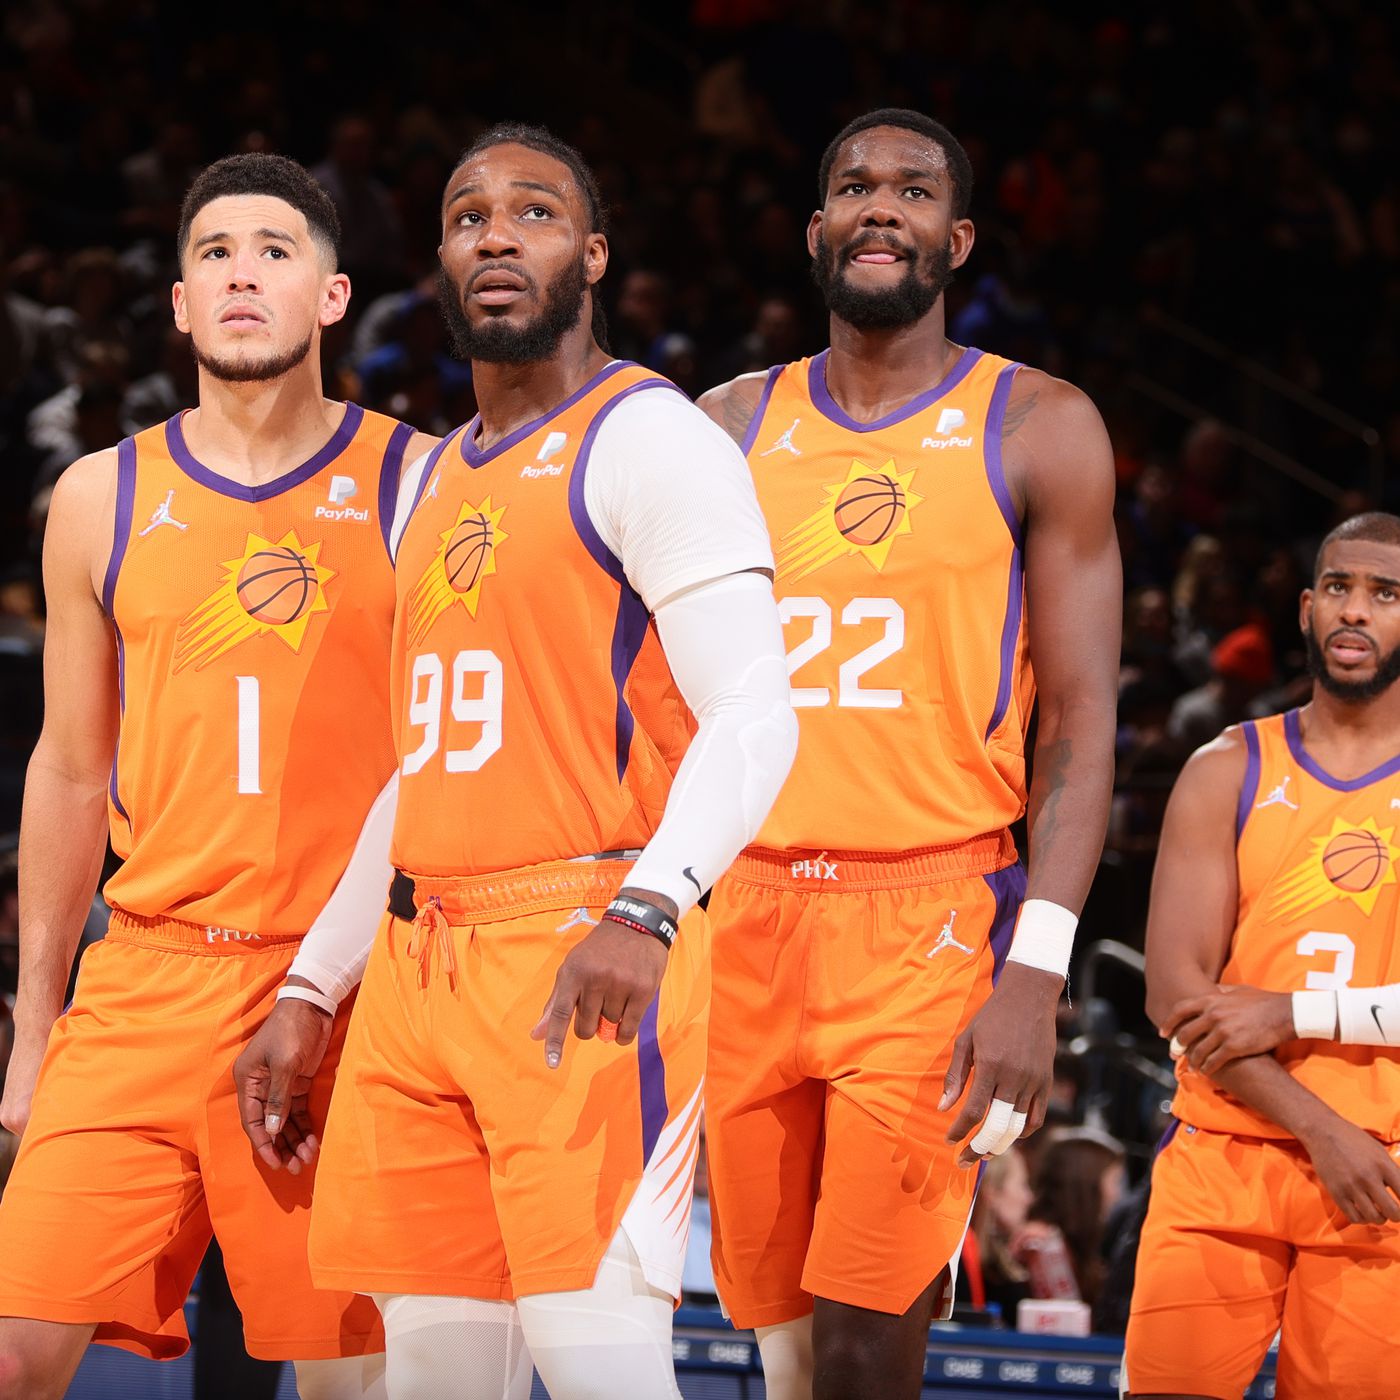 Re-setting the stage: Phoenix Suns cap update, mechanisms to 